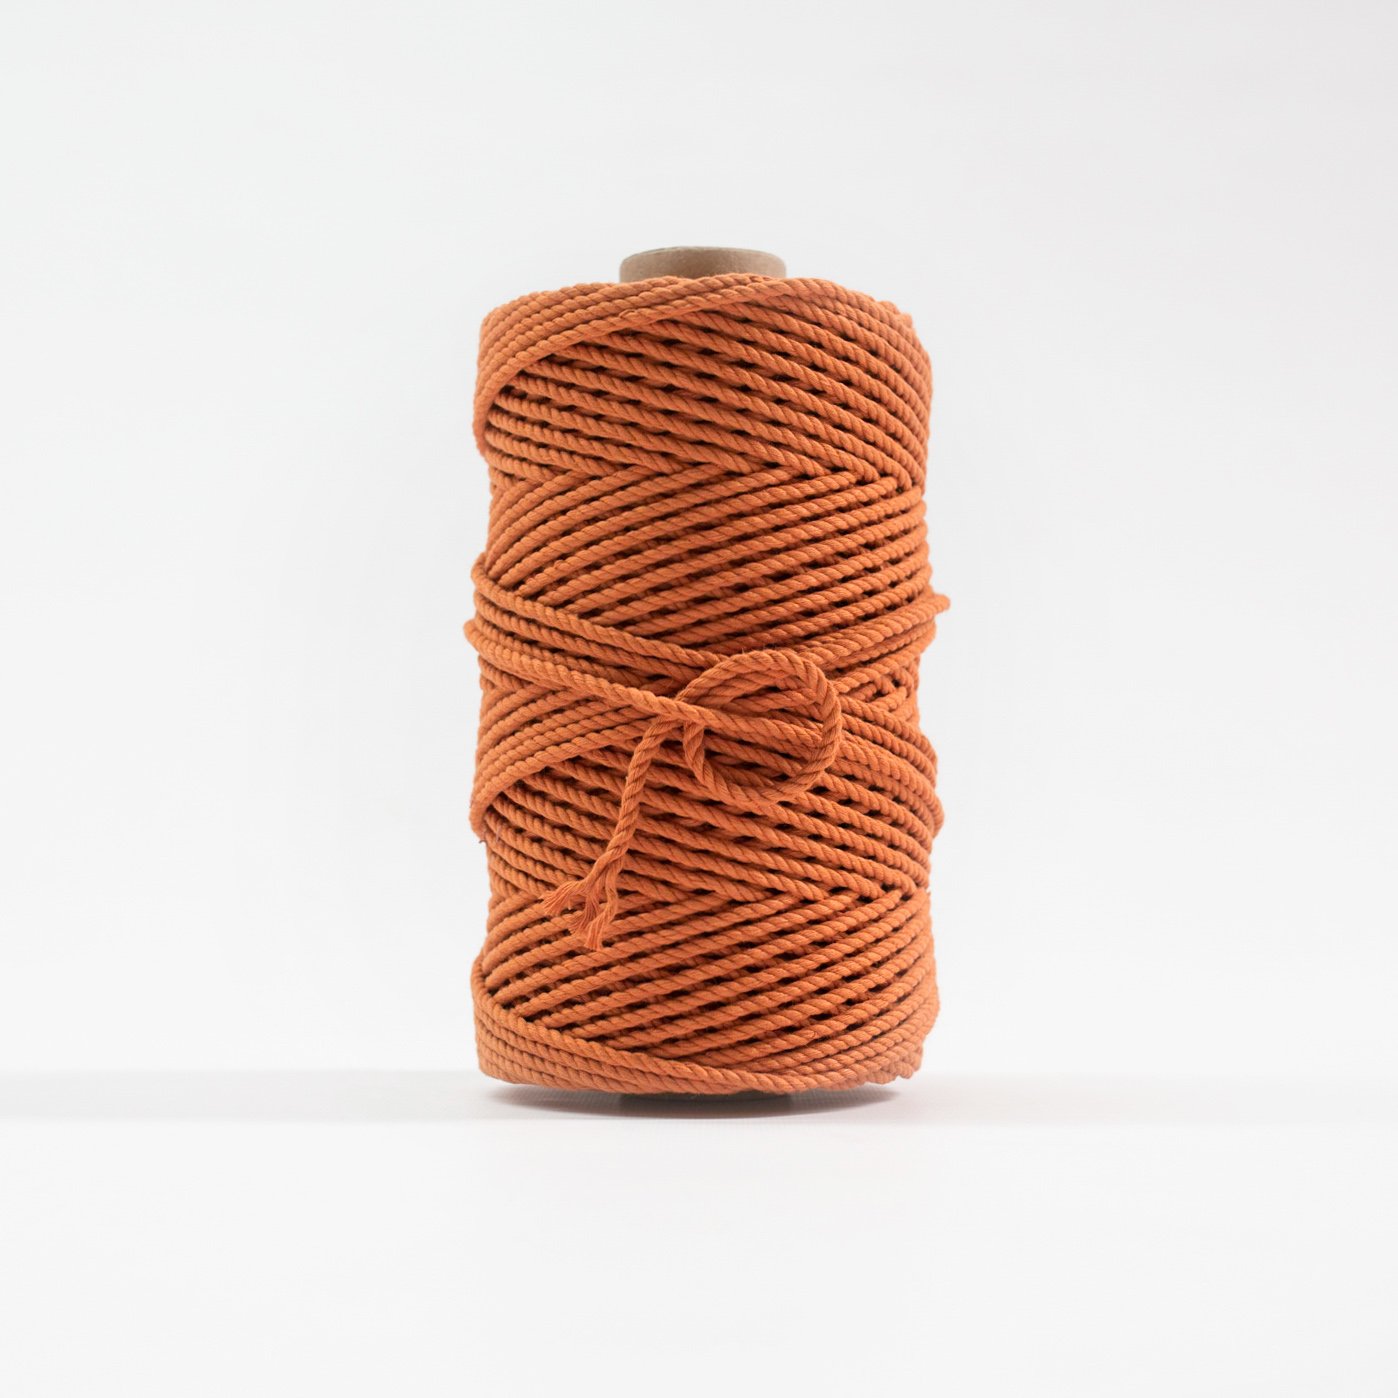 Mary Maker Studio Luxe Colour Cotton 4mm 1KG Recycled Luxe Macrame Rope // Citrine macrame cotton macrame rope macrame workshop macrame patterns macrame